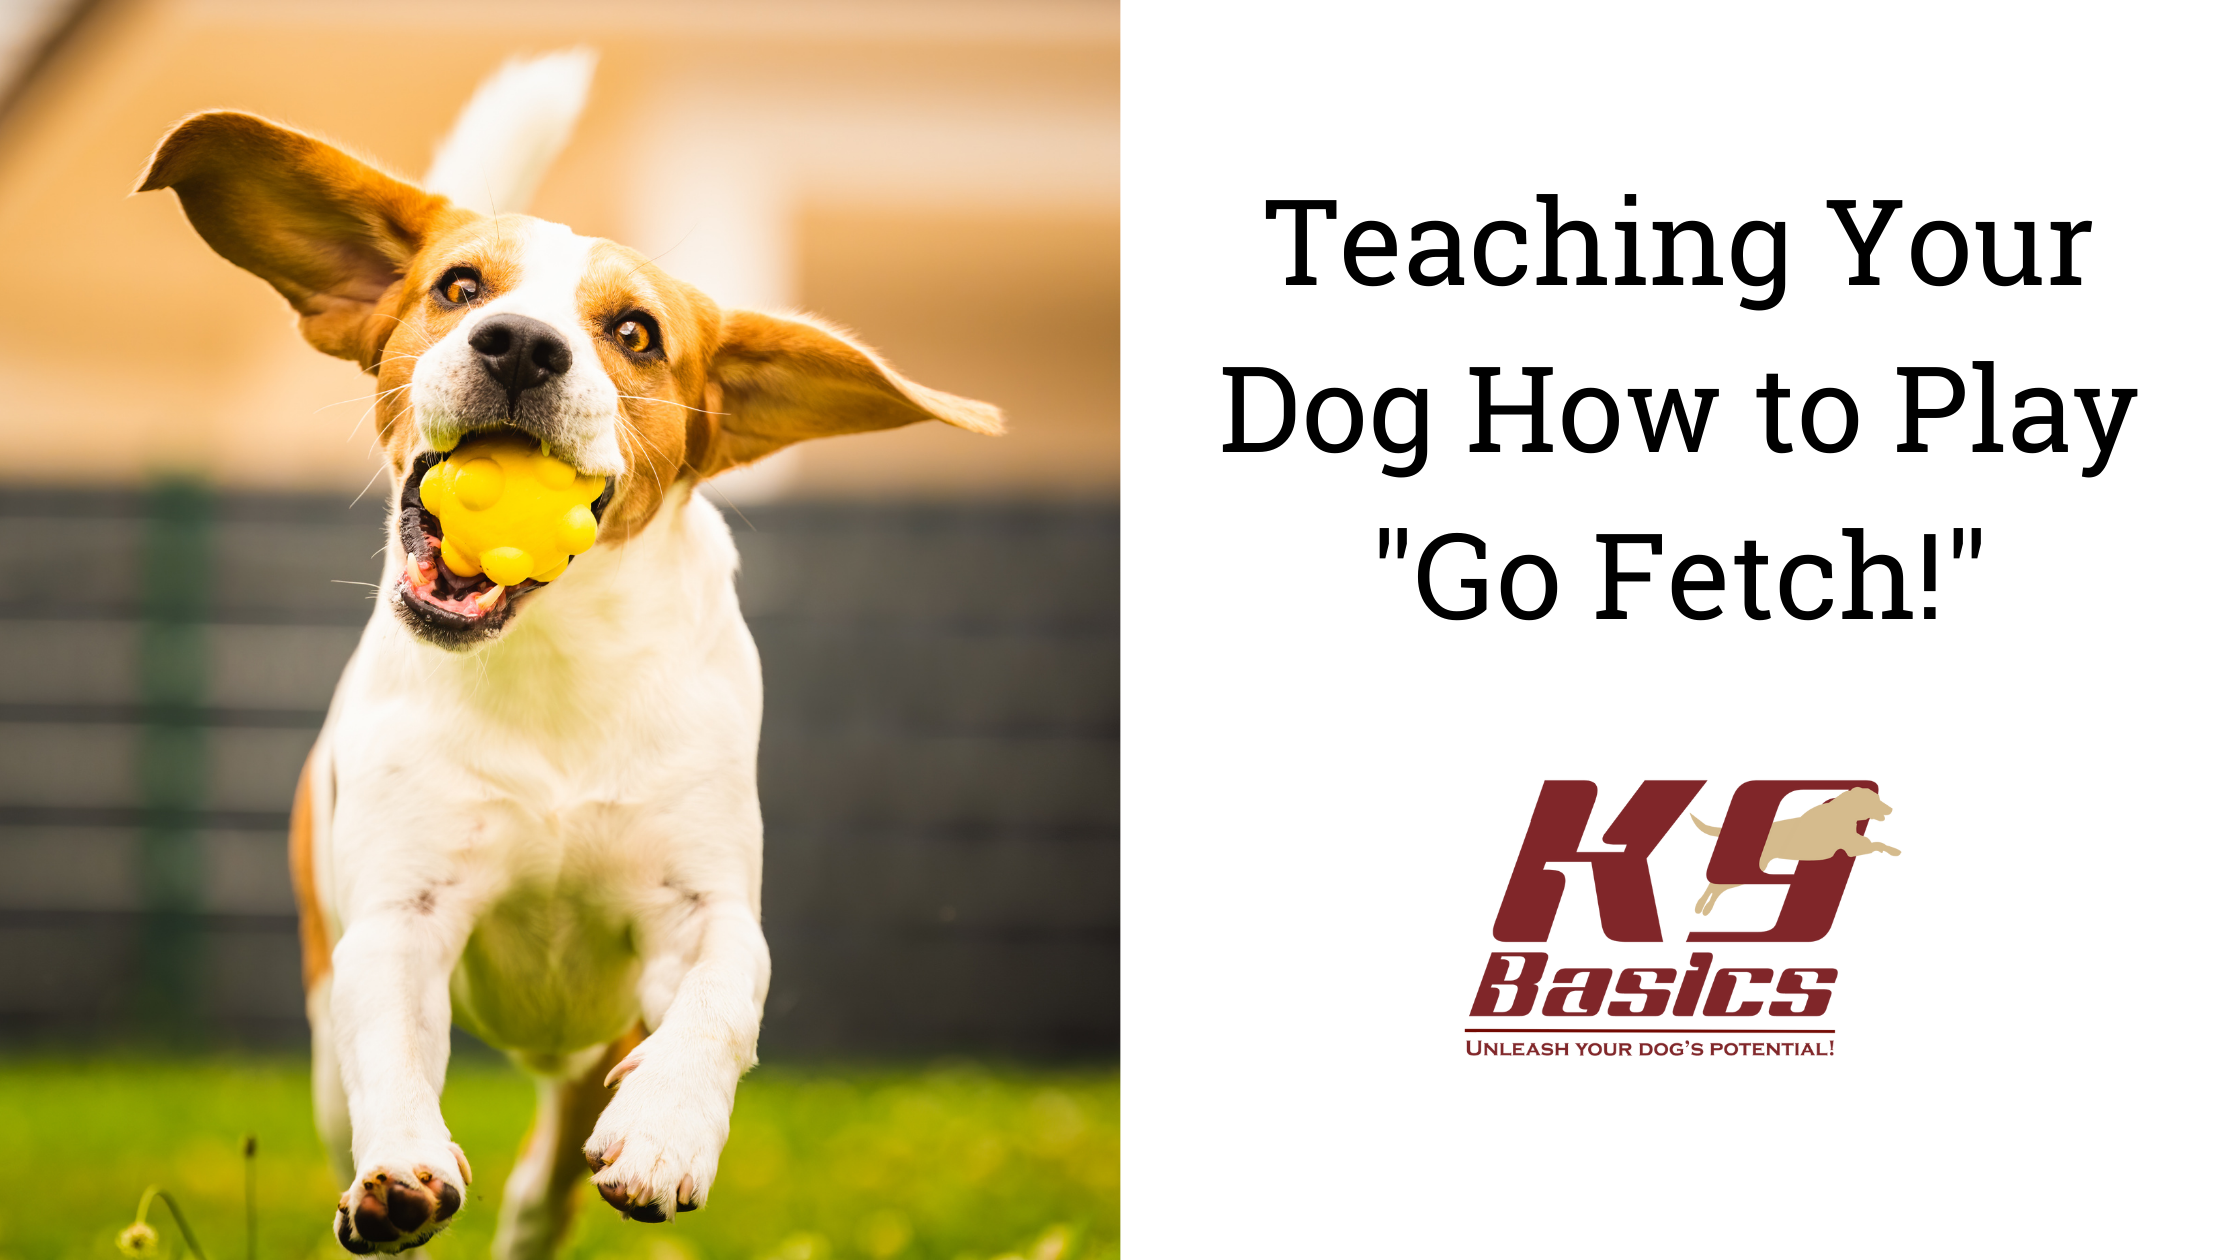 Teaching Your Dog How to Play “Go Fetch!”